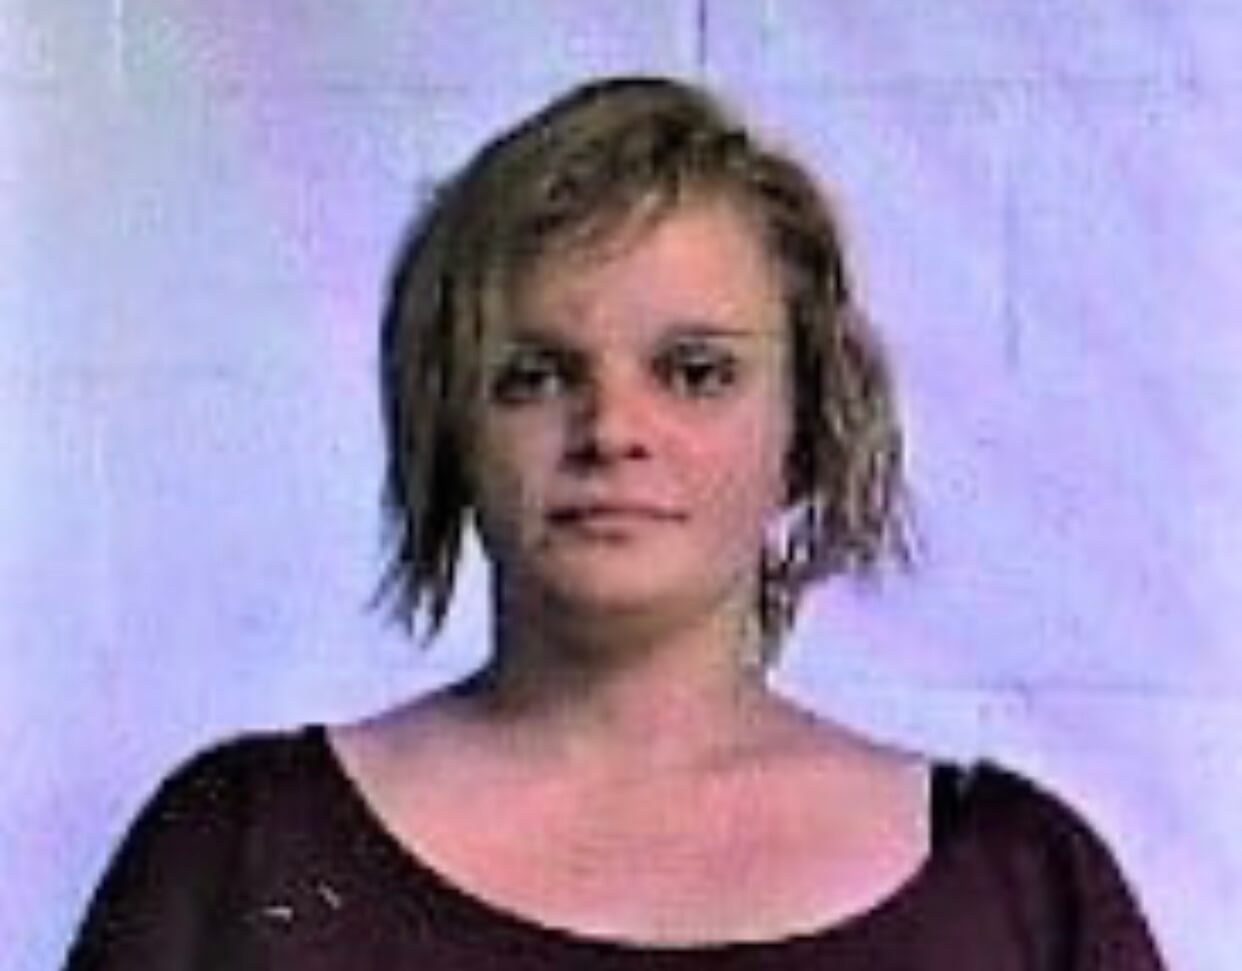 Corinth woman arrested for felony taking of a motor vehicle